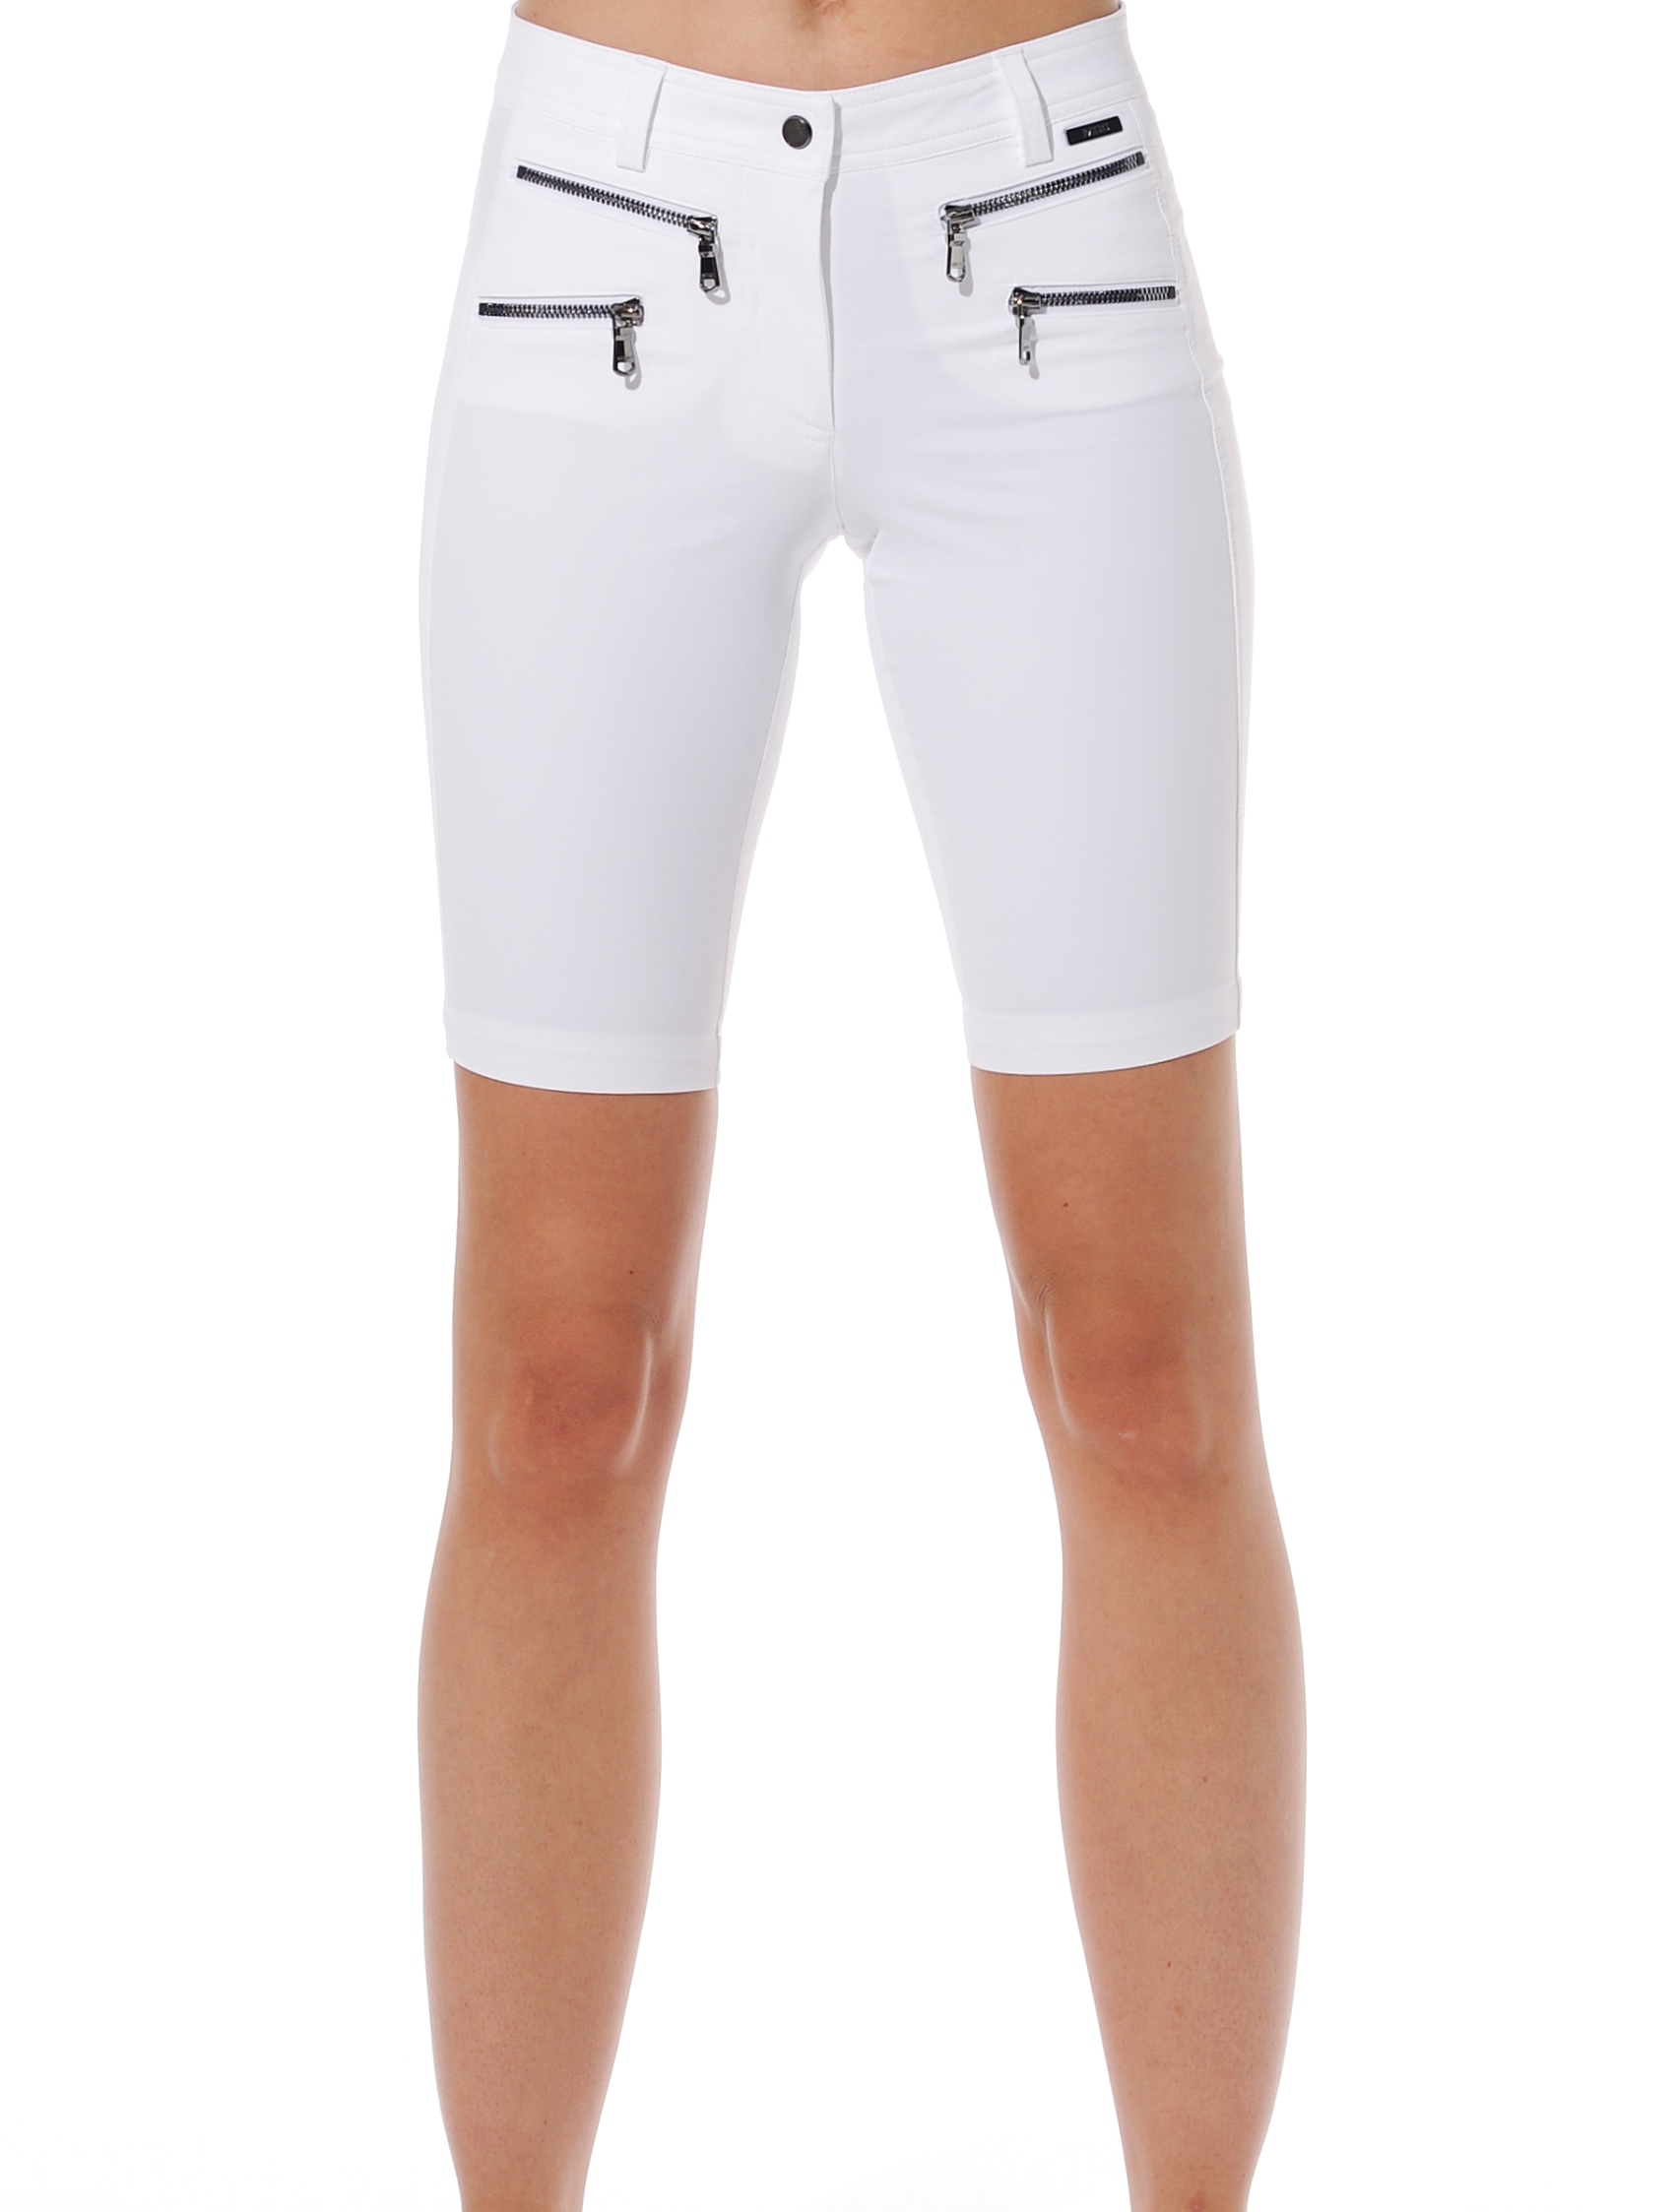 4way stretch double zip shorts white 